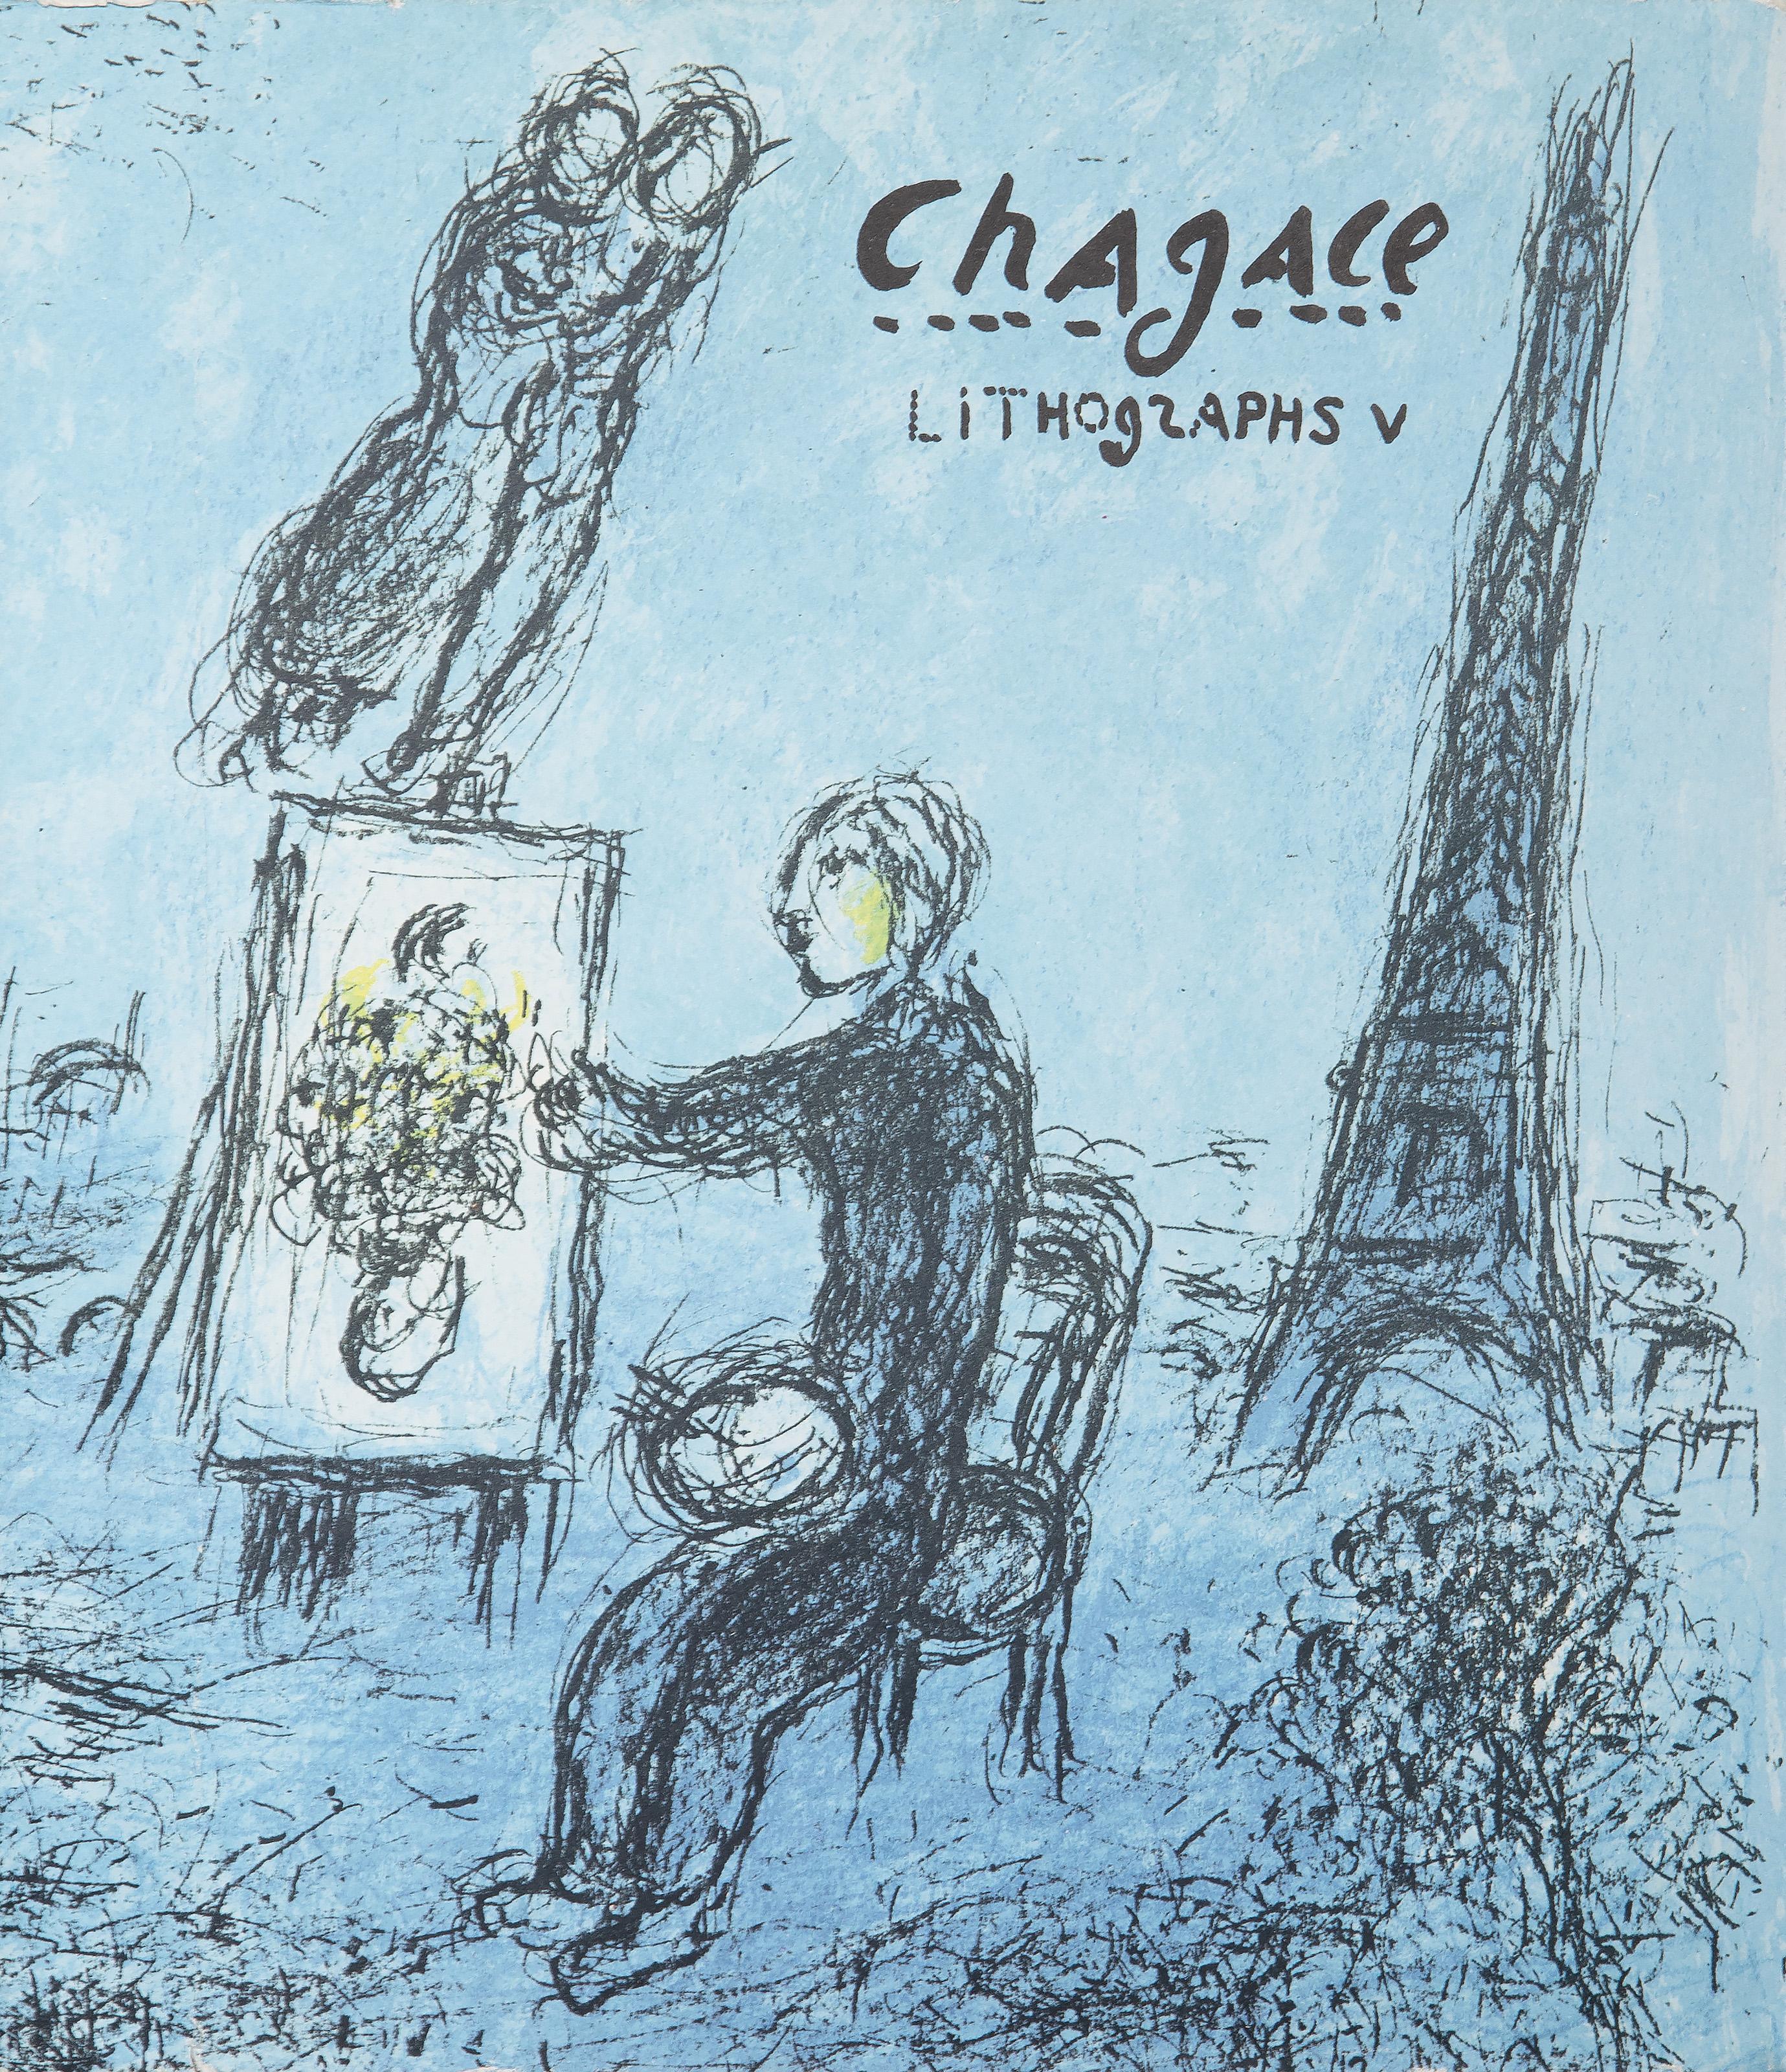 Marc Chagall, Russian (1887 - 1985) -  Lithographs V (Cover). Year: 1984, Medium: Lithograph, Size: 13 x 11 in. (33.02 x 27.94 cm), Printer: Mourlot, Paris, Publisher: Crown Publishers Inc., New York 